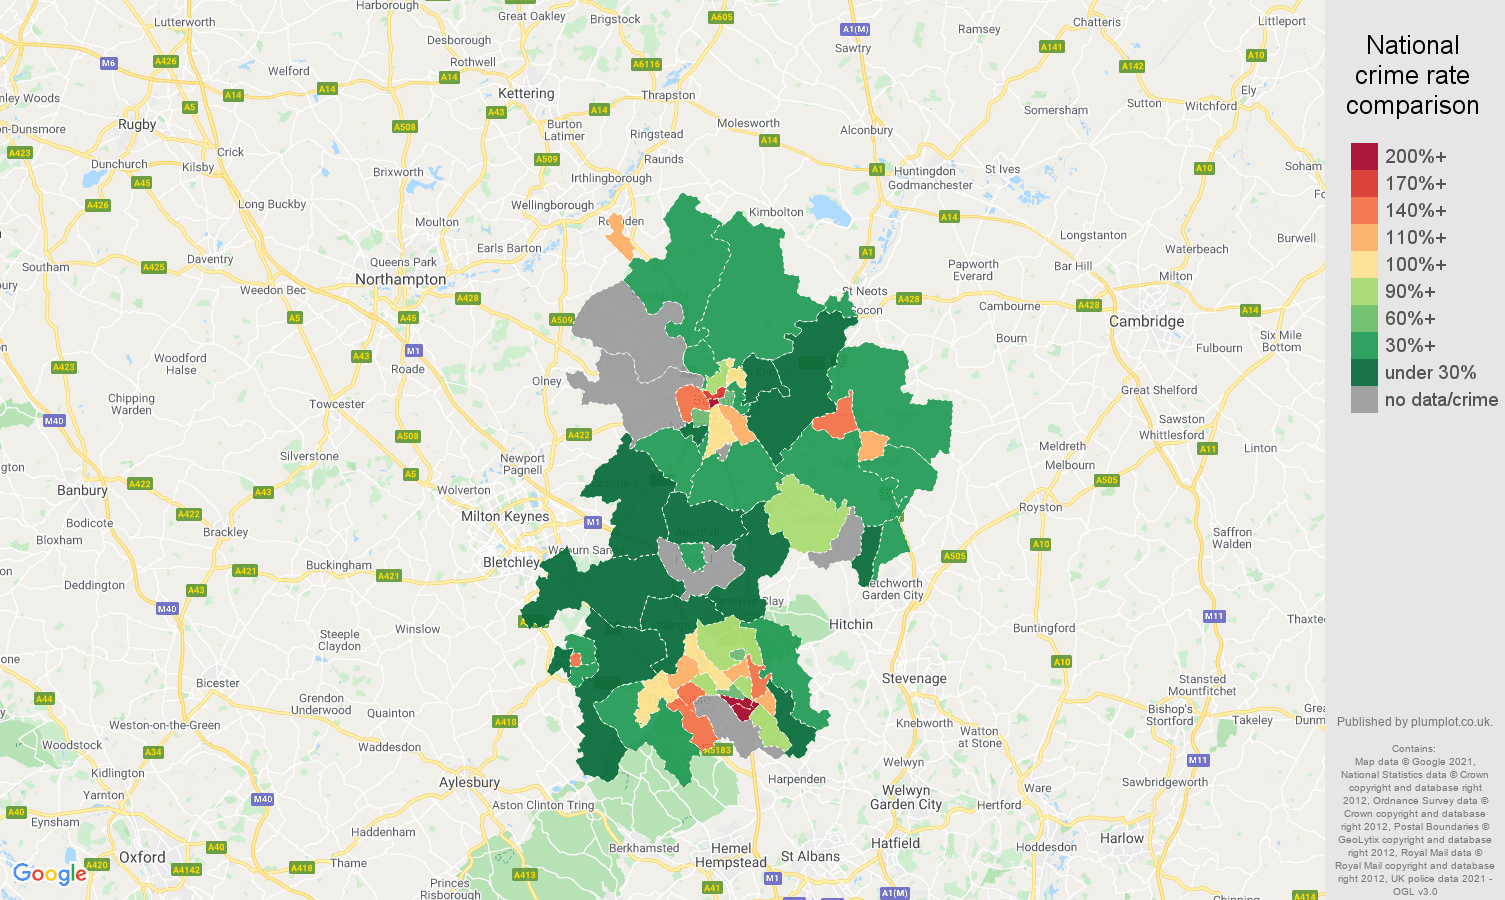 Bedfordshire robbery crime rate comparison map